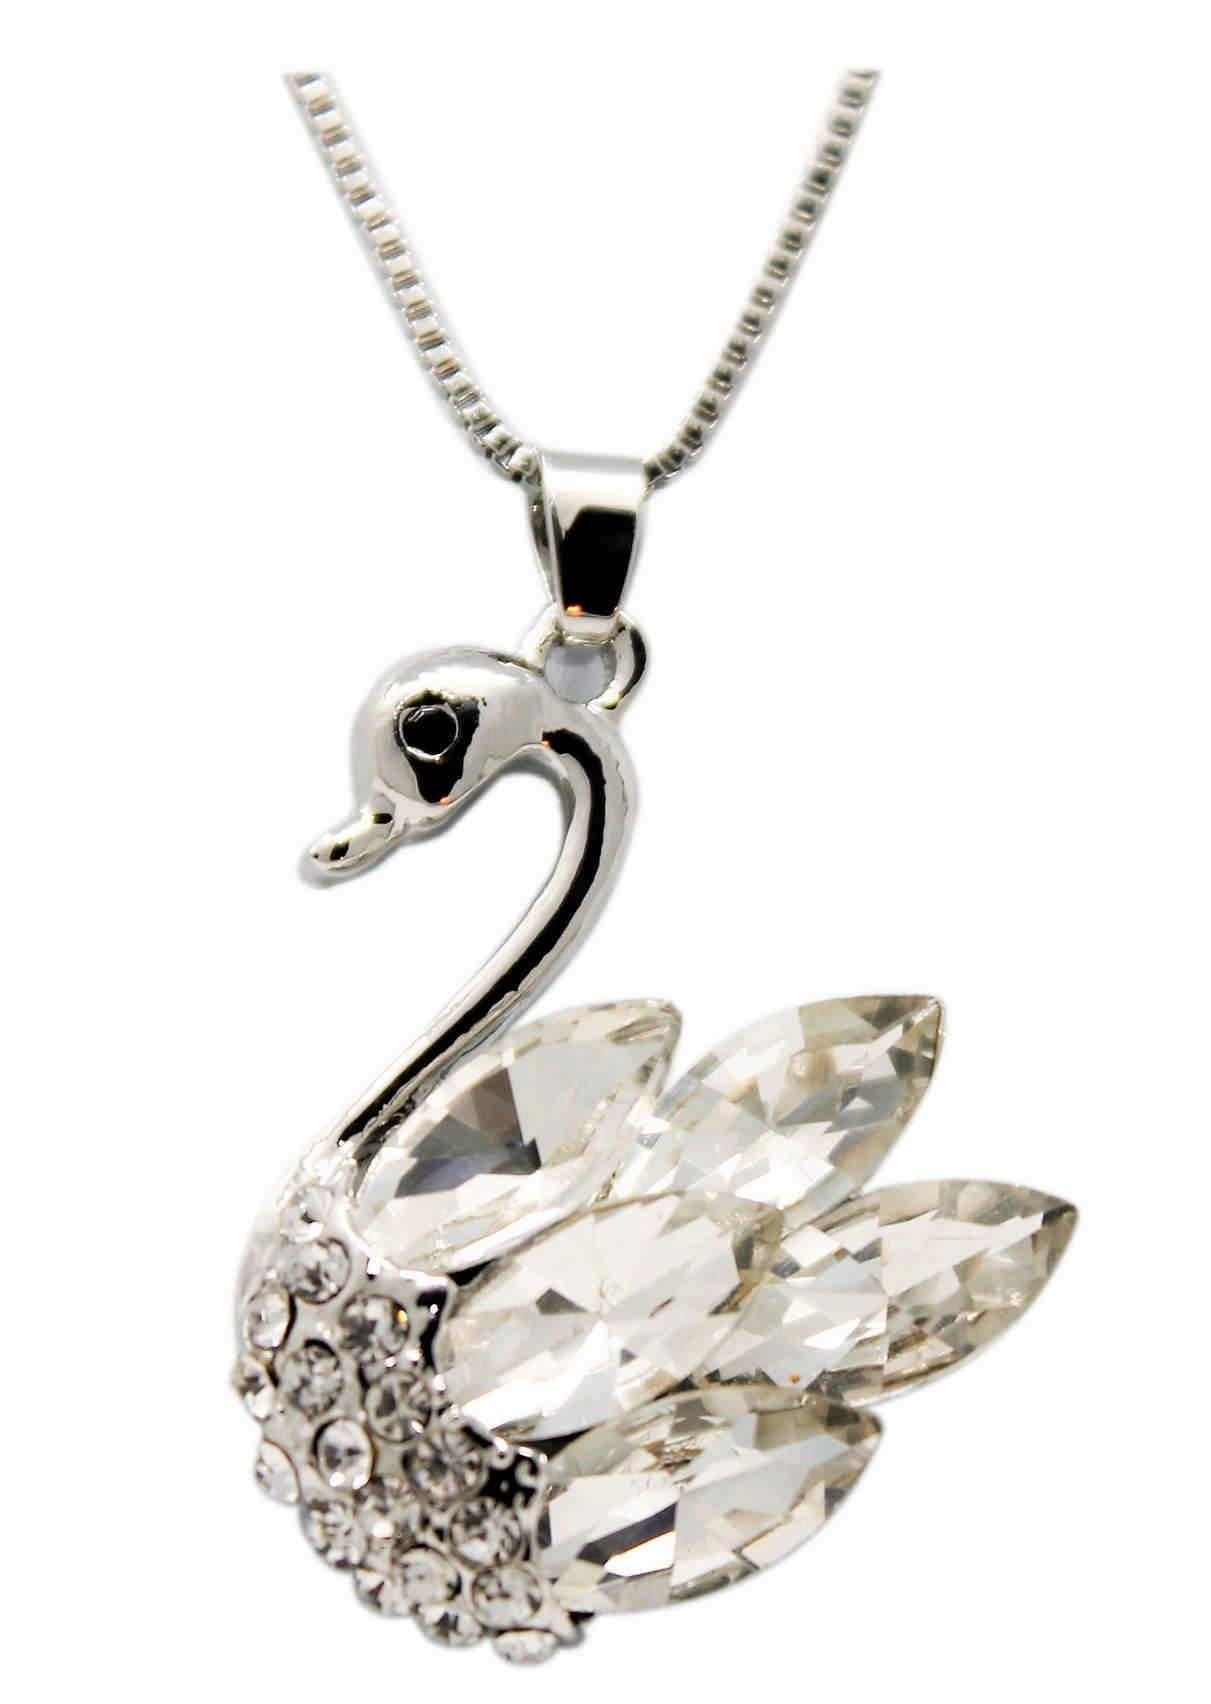 Indian Petals Rhinestones Studded Duck Design Imitation Fashion Metal Double Pendant with Long Chain for Girls